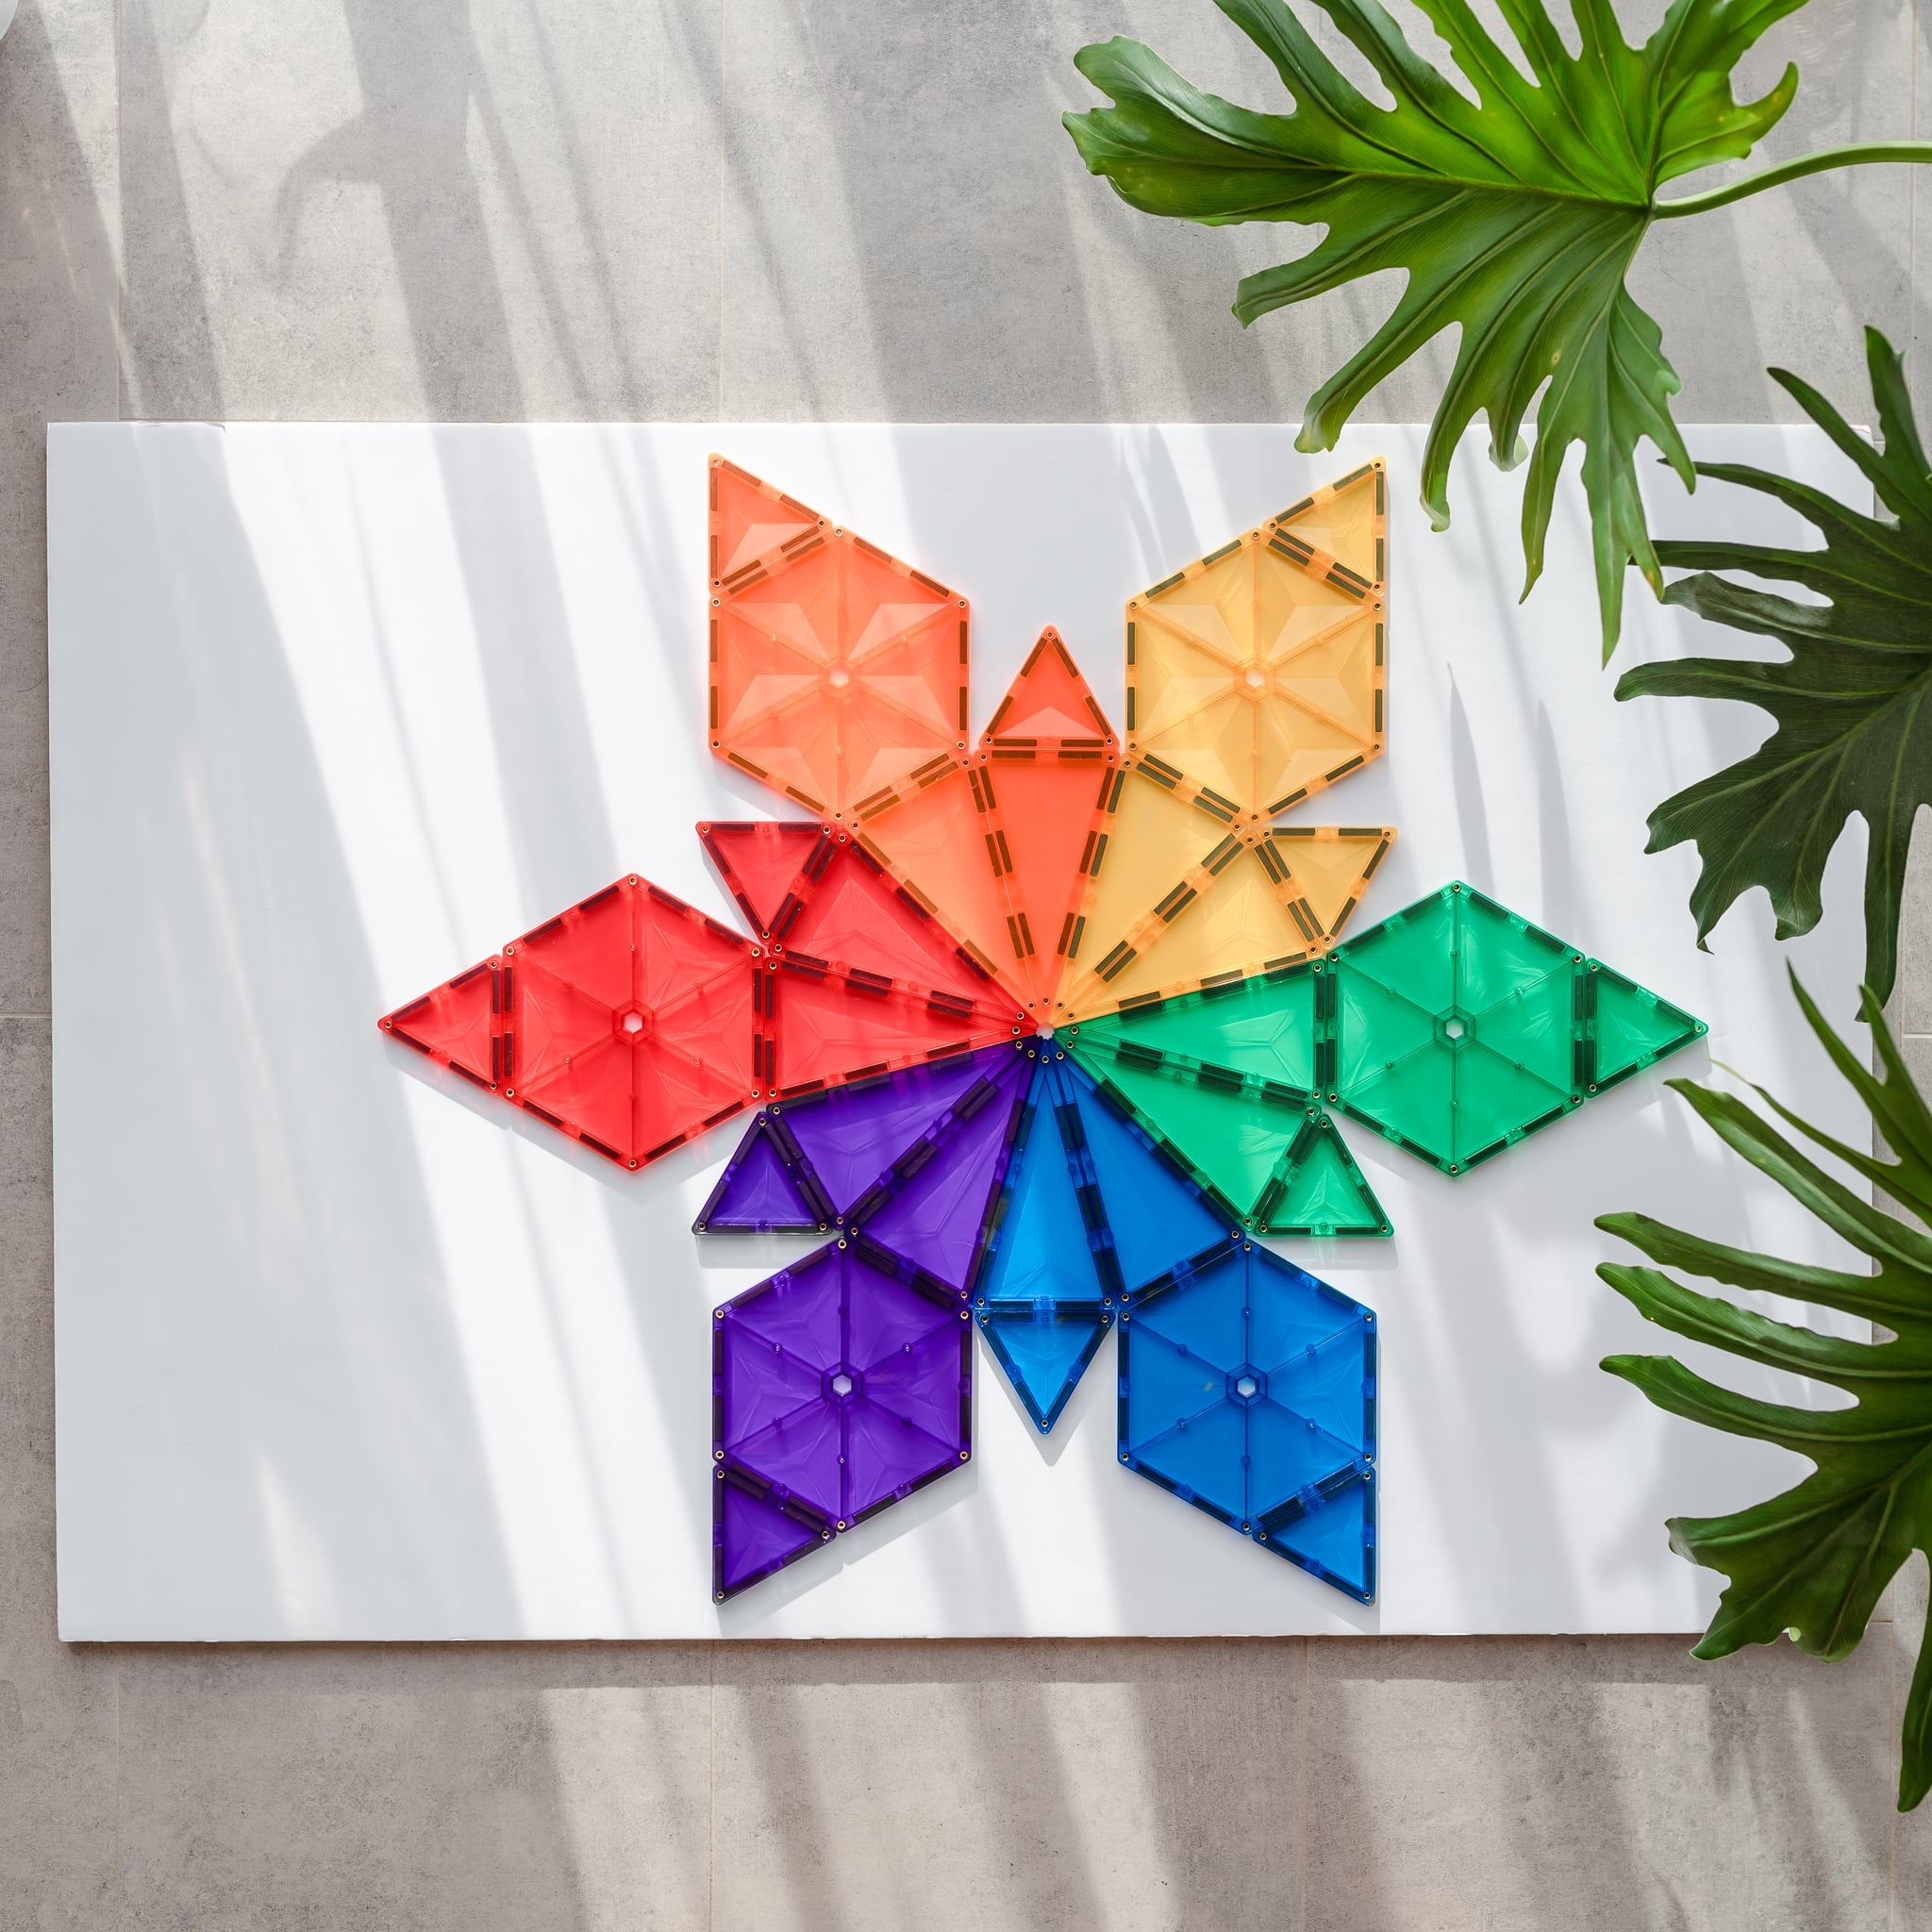 Connetix Geometry 30 Piece Magnetic Tiles Pack Rainbow  | 10% OFF SALE | Children of the Wild